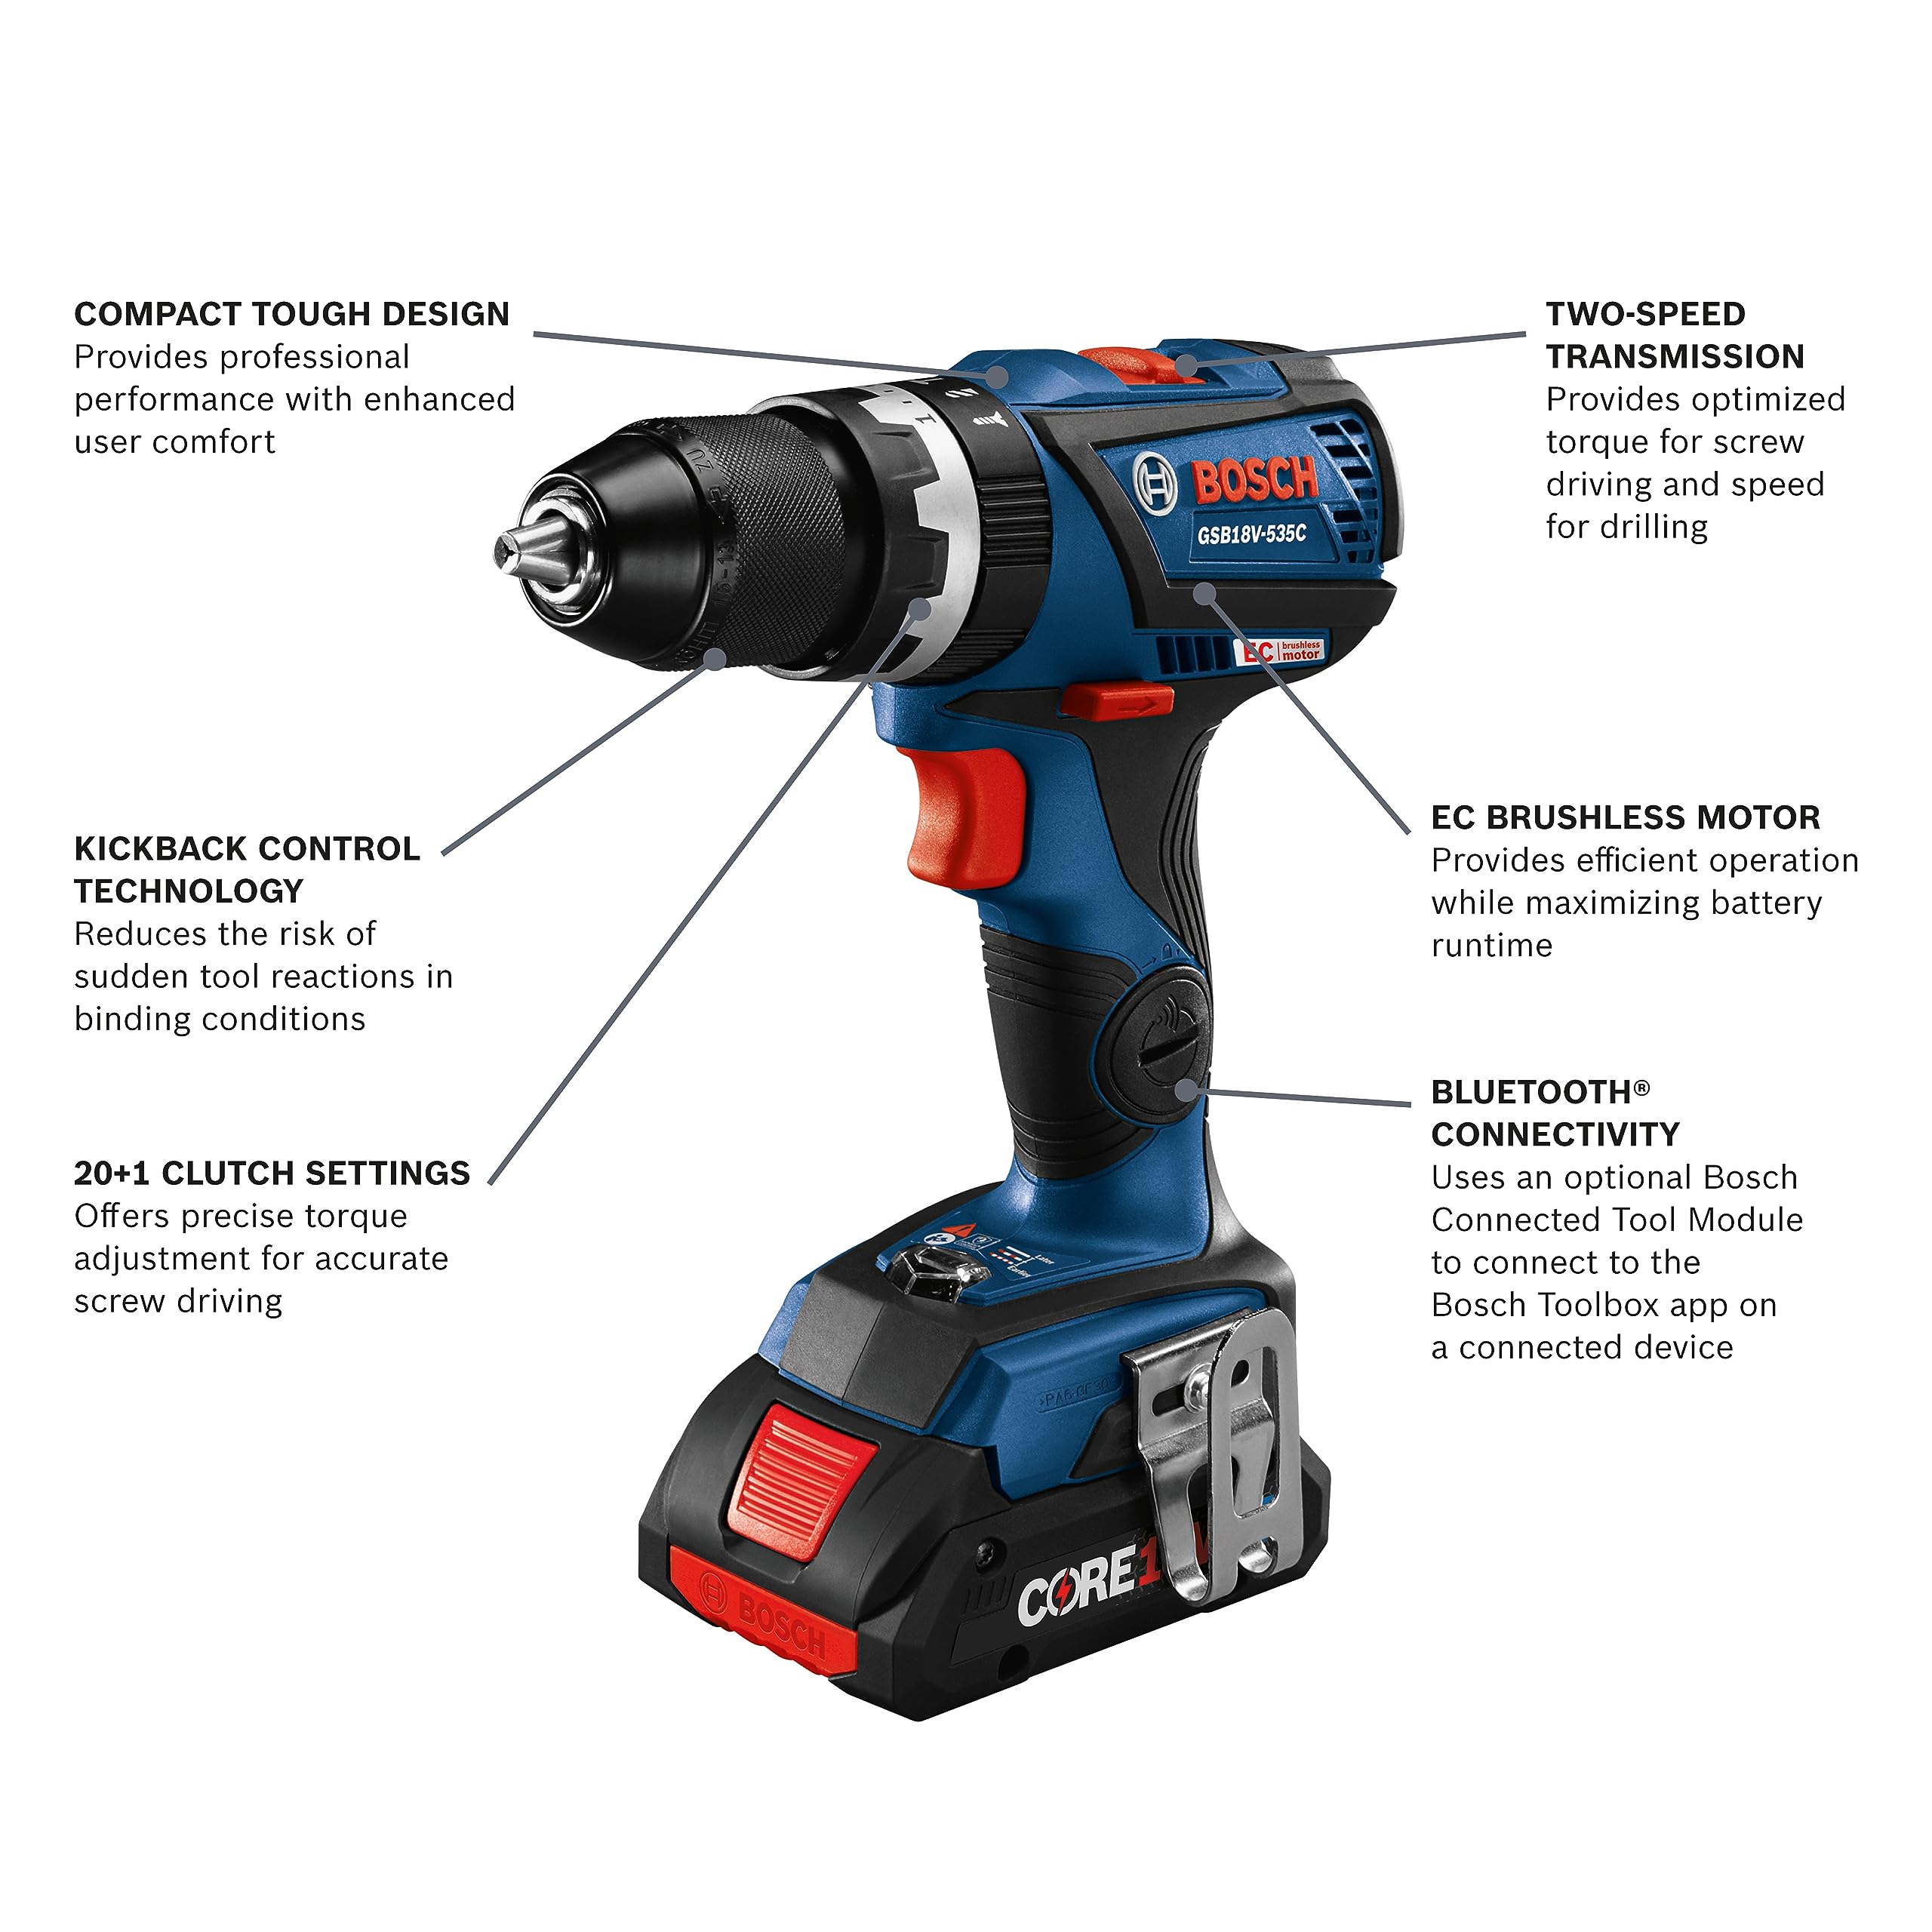 BOSCH GXL18V-601B25 18V 6-Tool Combo Kit with 2-In-1 Bit/Socket Impact Driver, Hammer Drill/Driver, Reciprocating Saw, Circular Saw, Angle Grinder, Floodlight and (2) CORE18V 4 Ah Compact Batteries